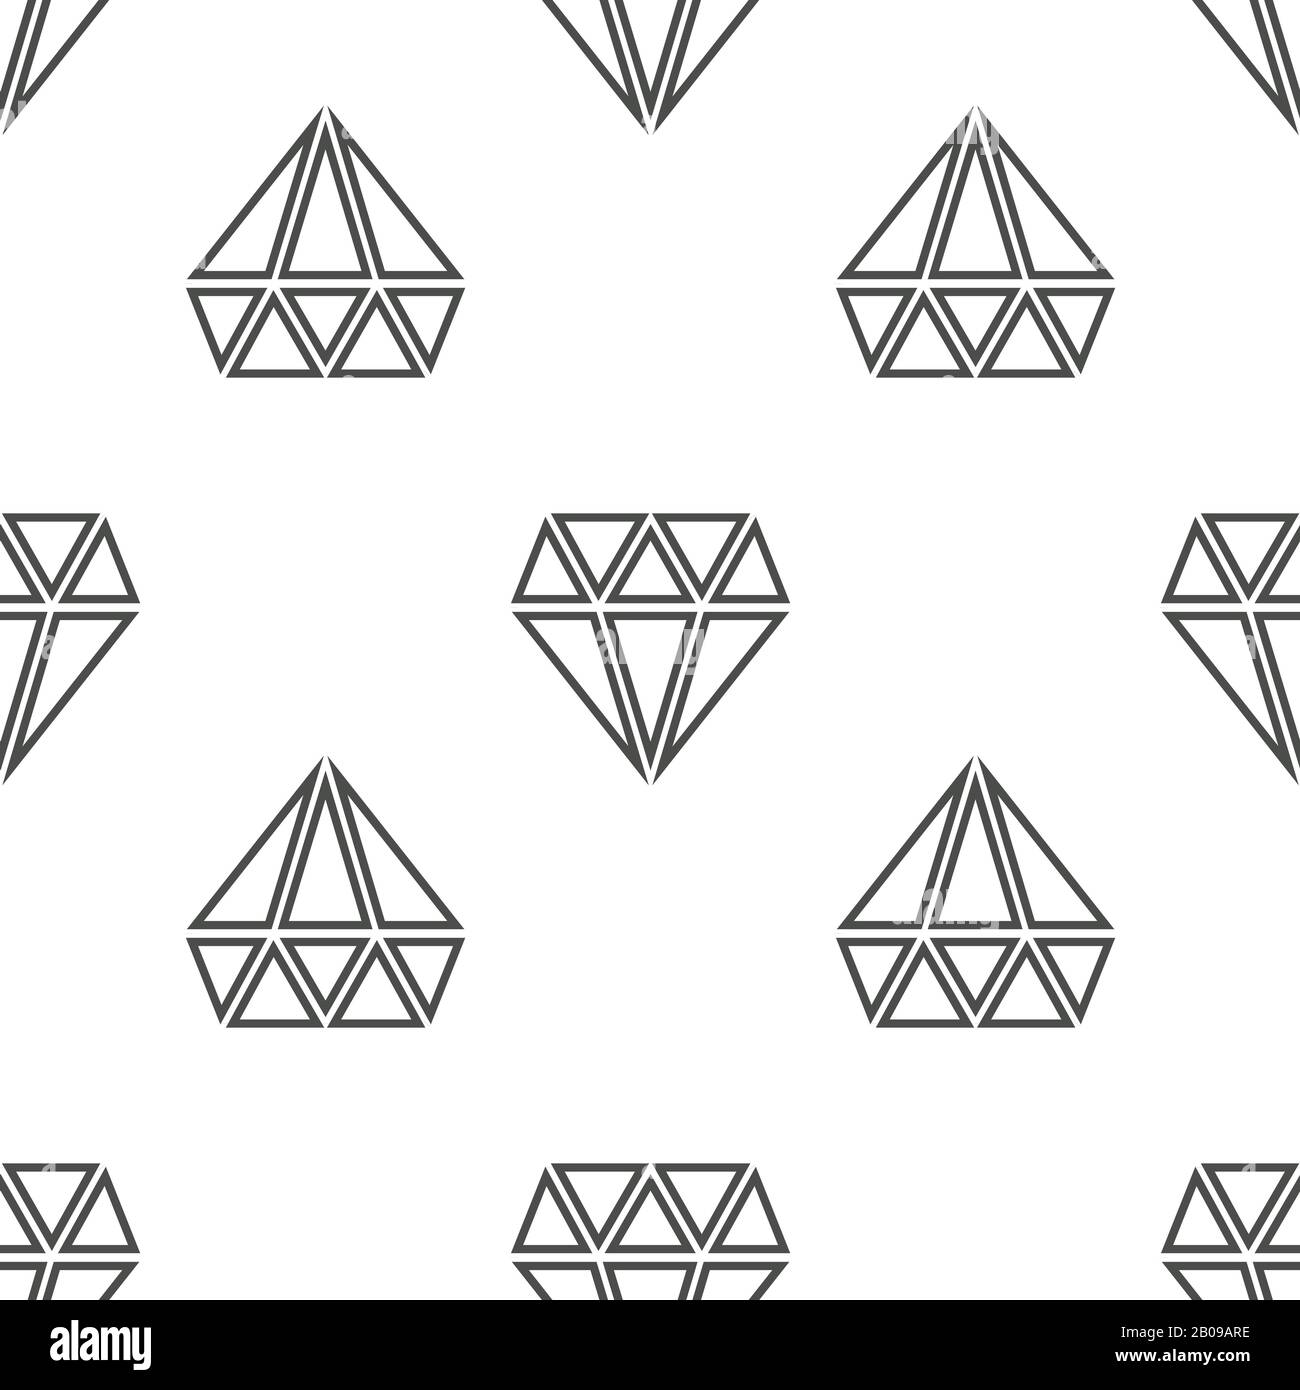 Diamonds vector seamless pattern in black and white. Linear background illustration Stock Vector